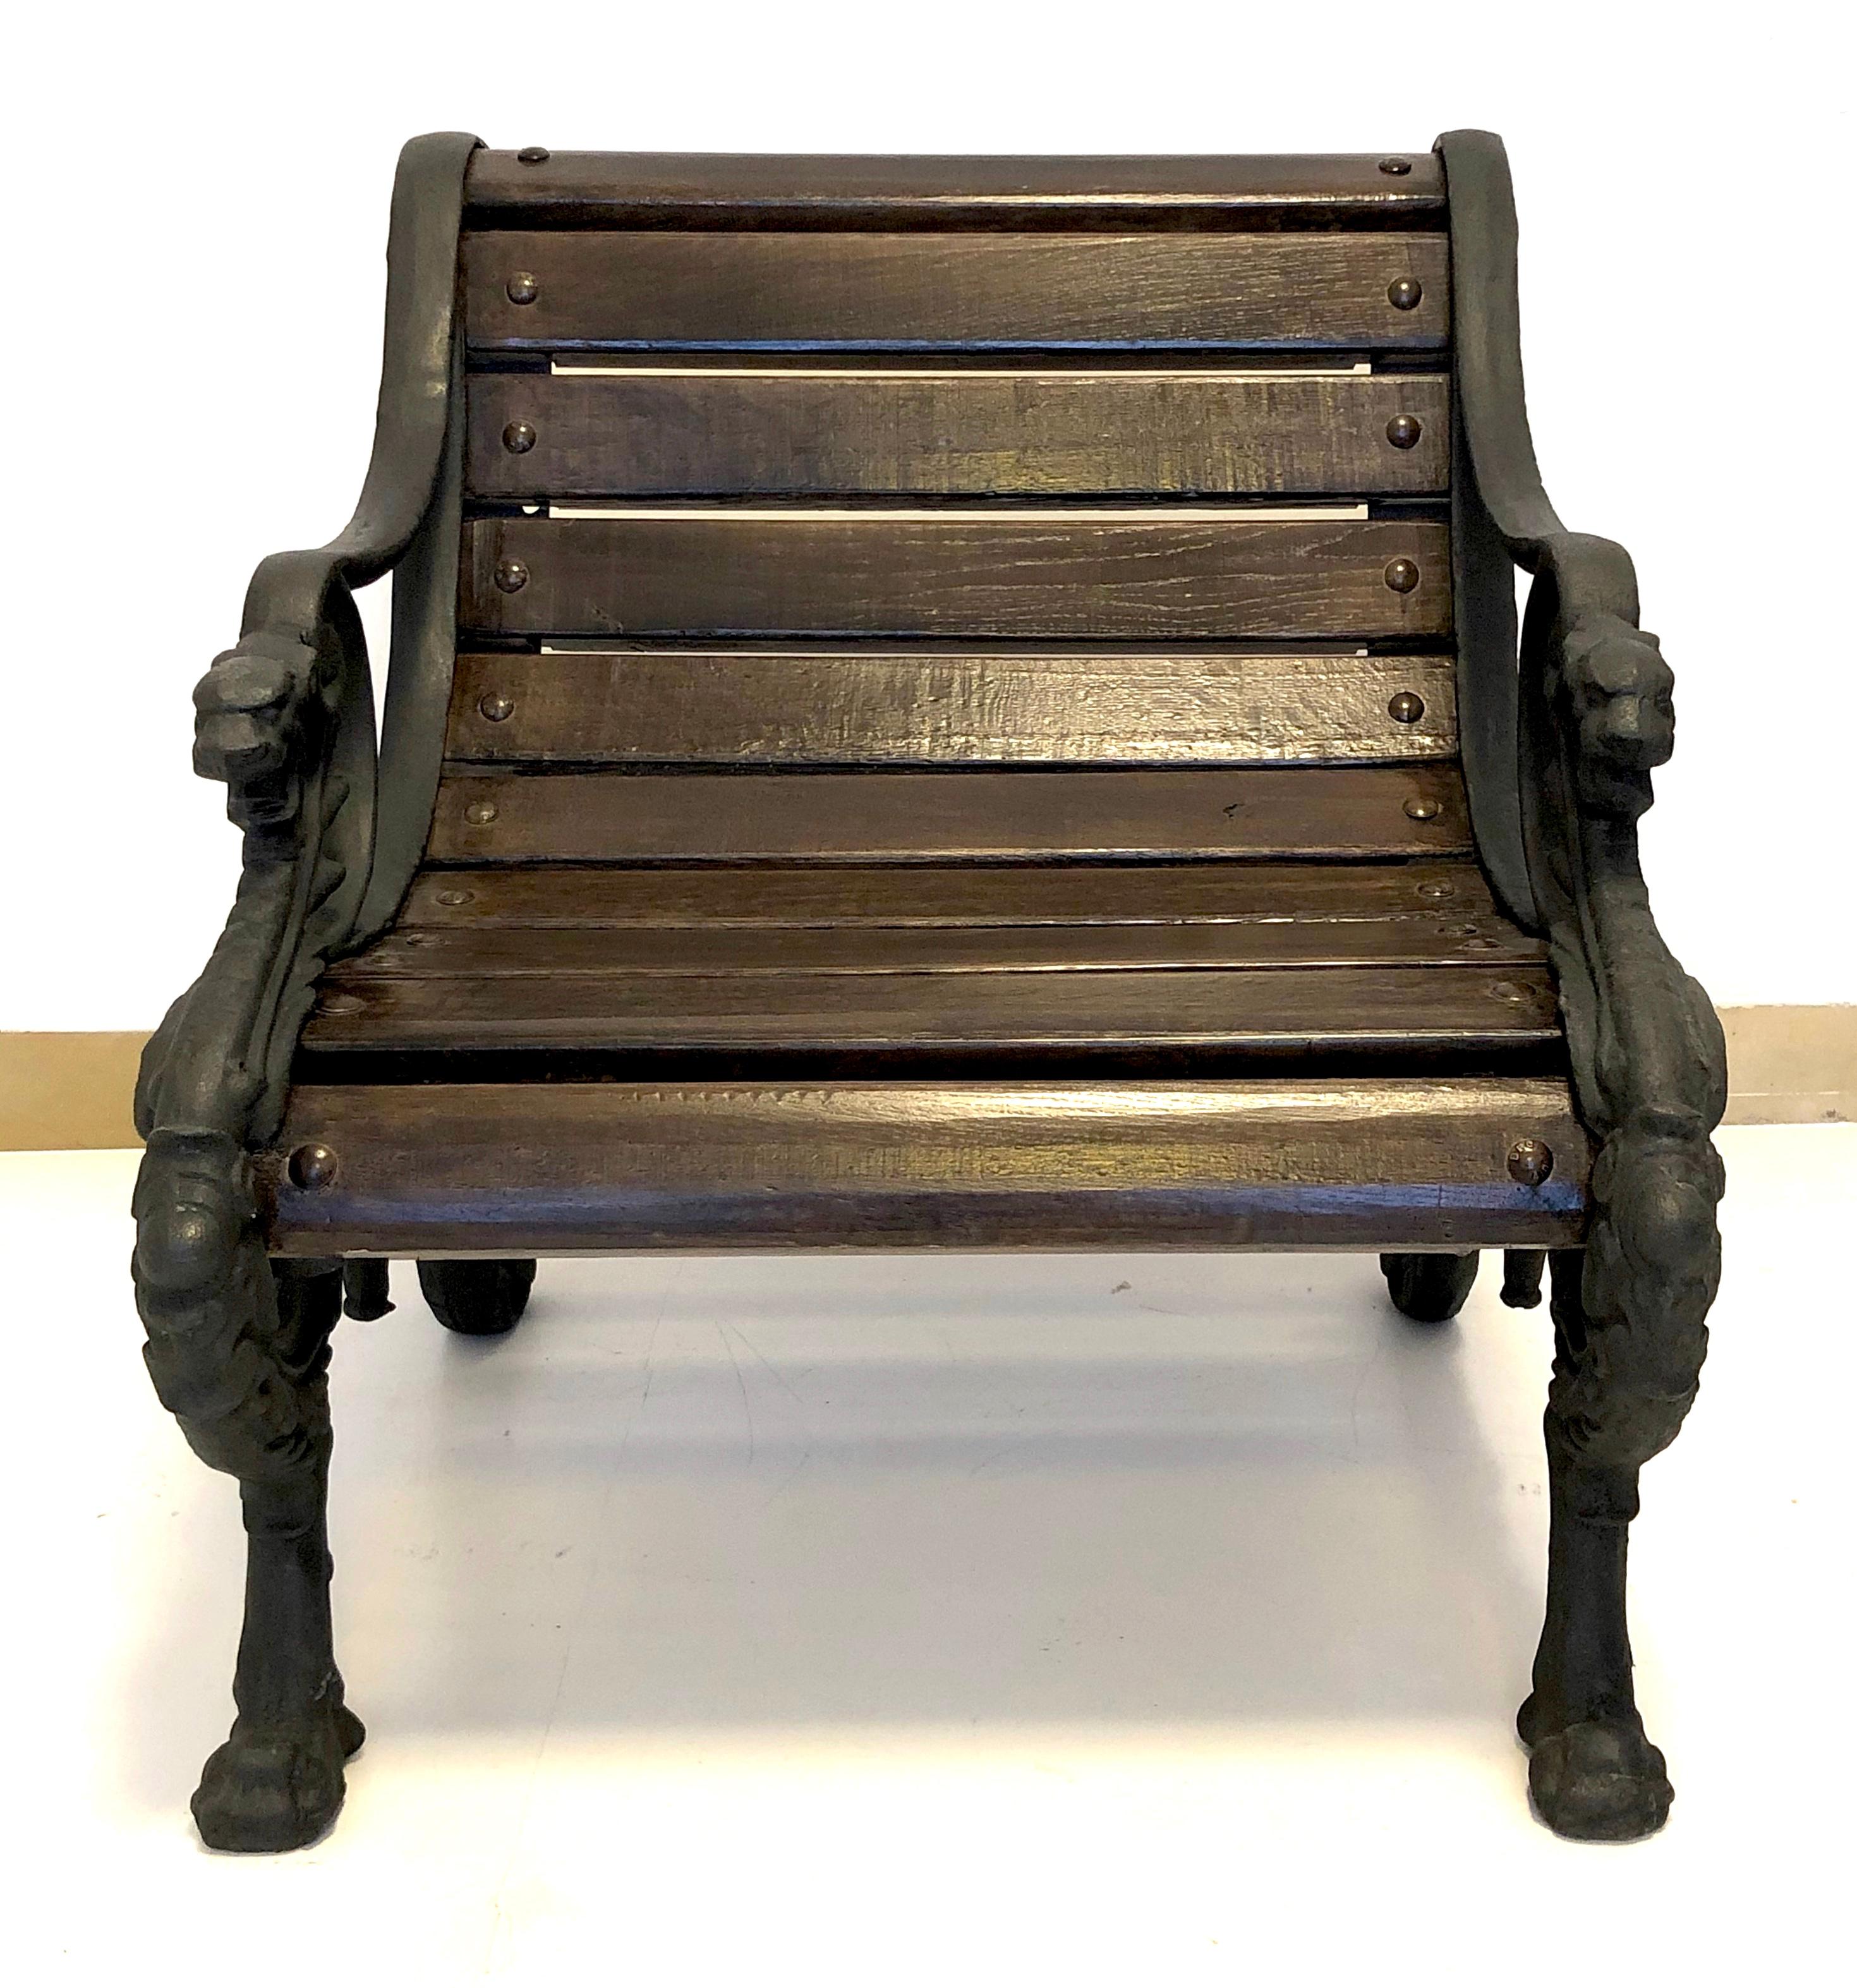 This pair of substantial cast iron and oak armchairs was made in France in circa 1860-1870. The iron armrests were designed as acanthus leaves surronded by scrollwork and terminating in lion heads. The rear feet were designed as acanthus leaves. The